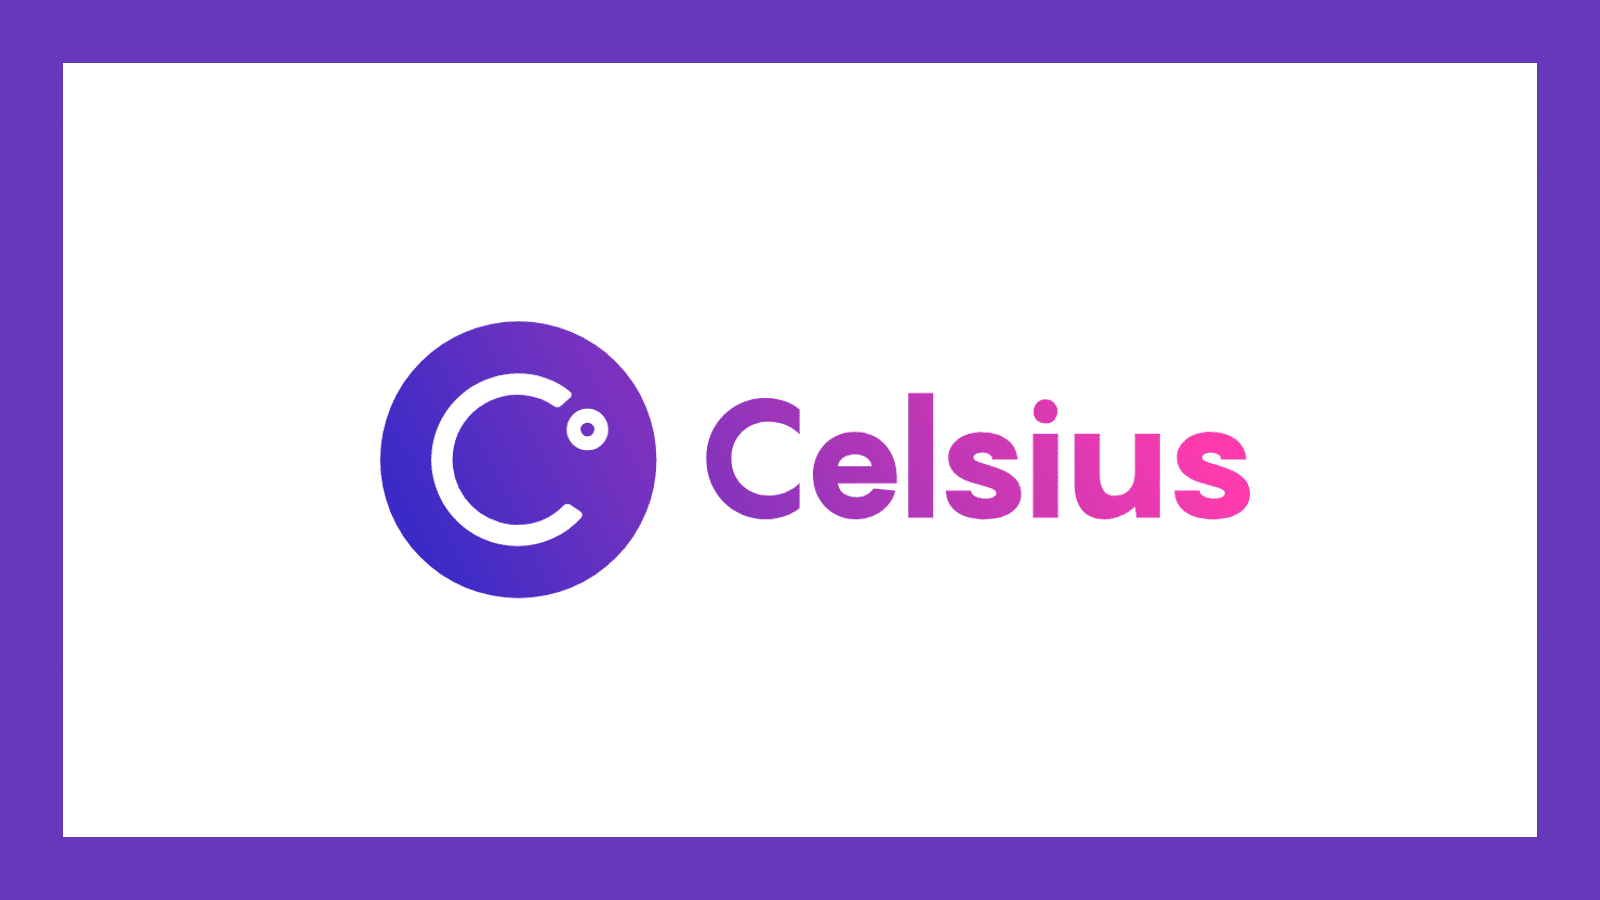 Celsius’ Controversial Transformation: From Failed Lender to Bitcoin Mining Venture